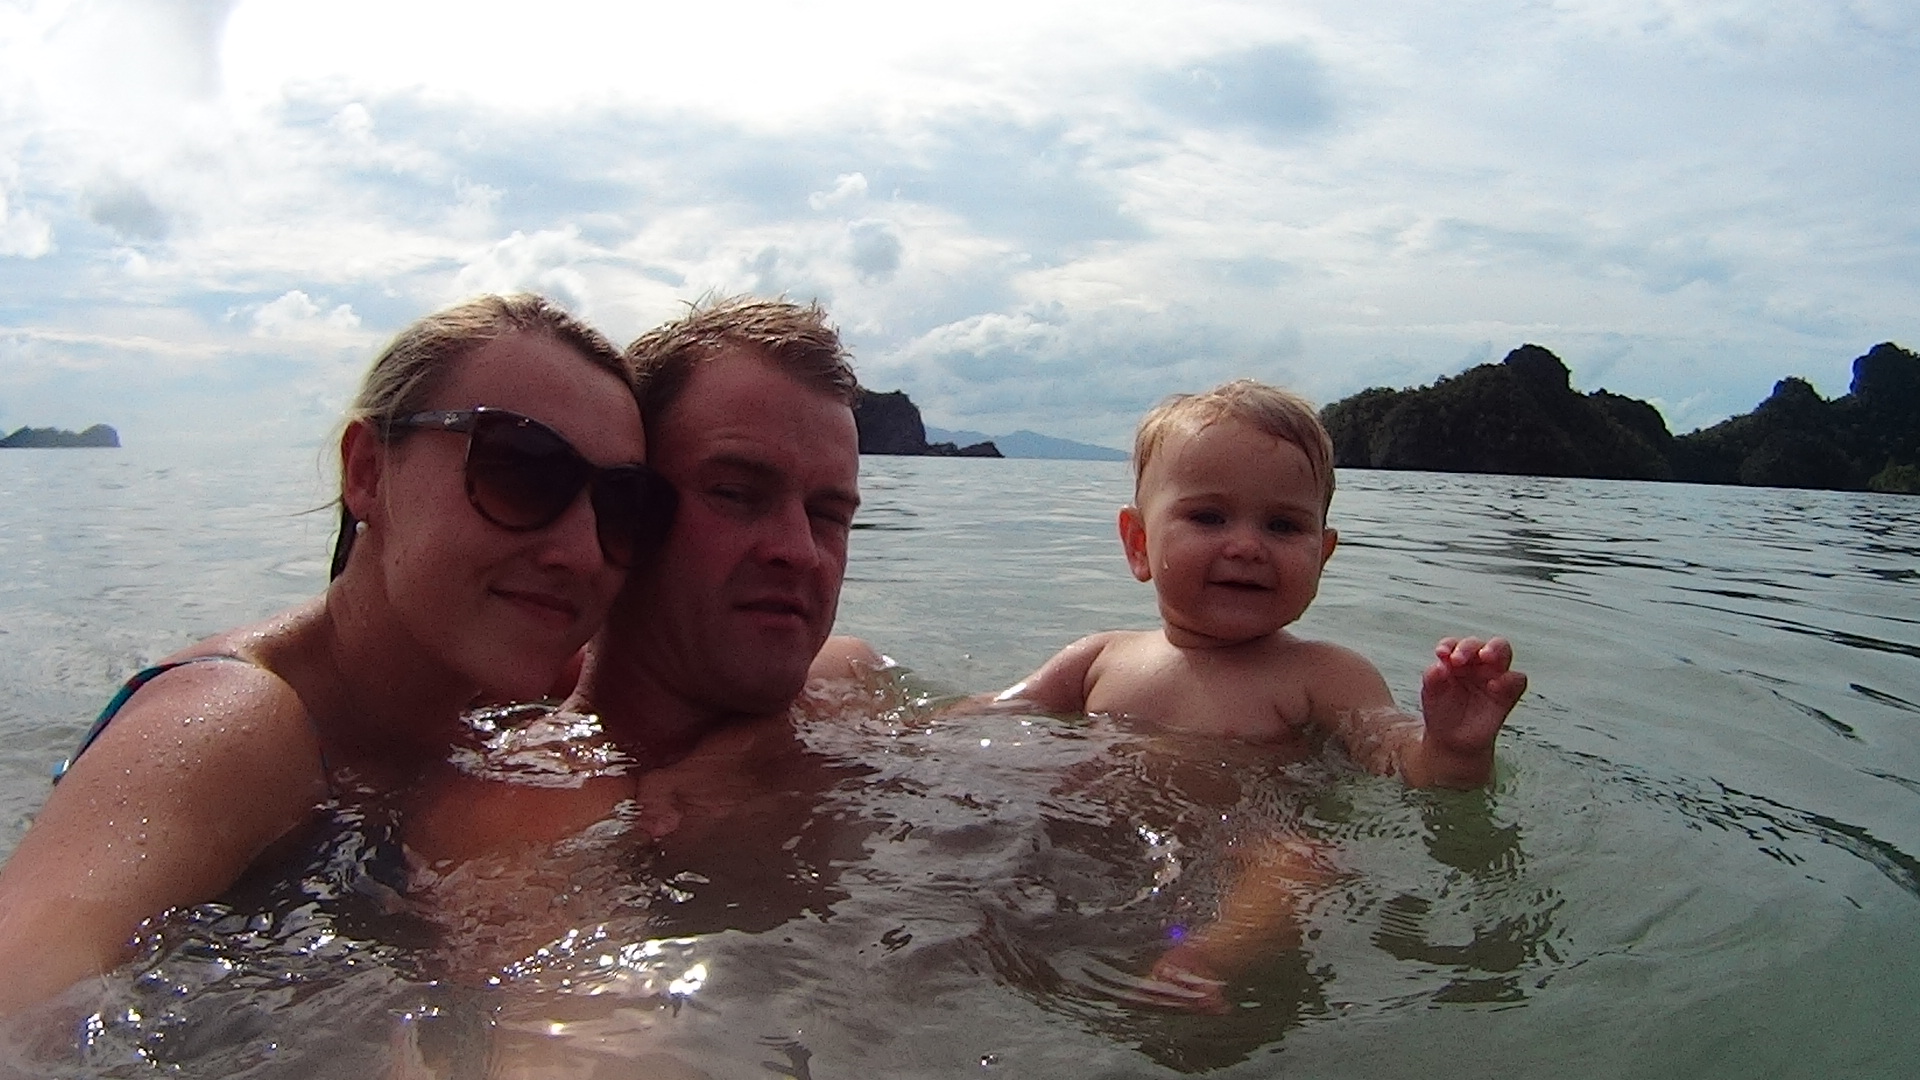 Langkawi, Malaysia with a baby